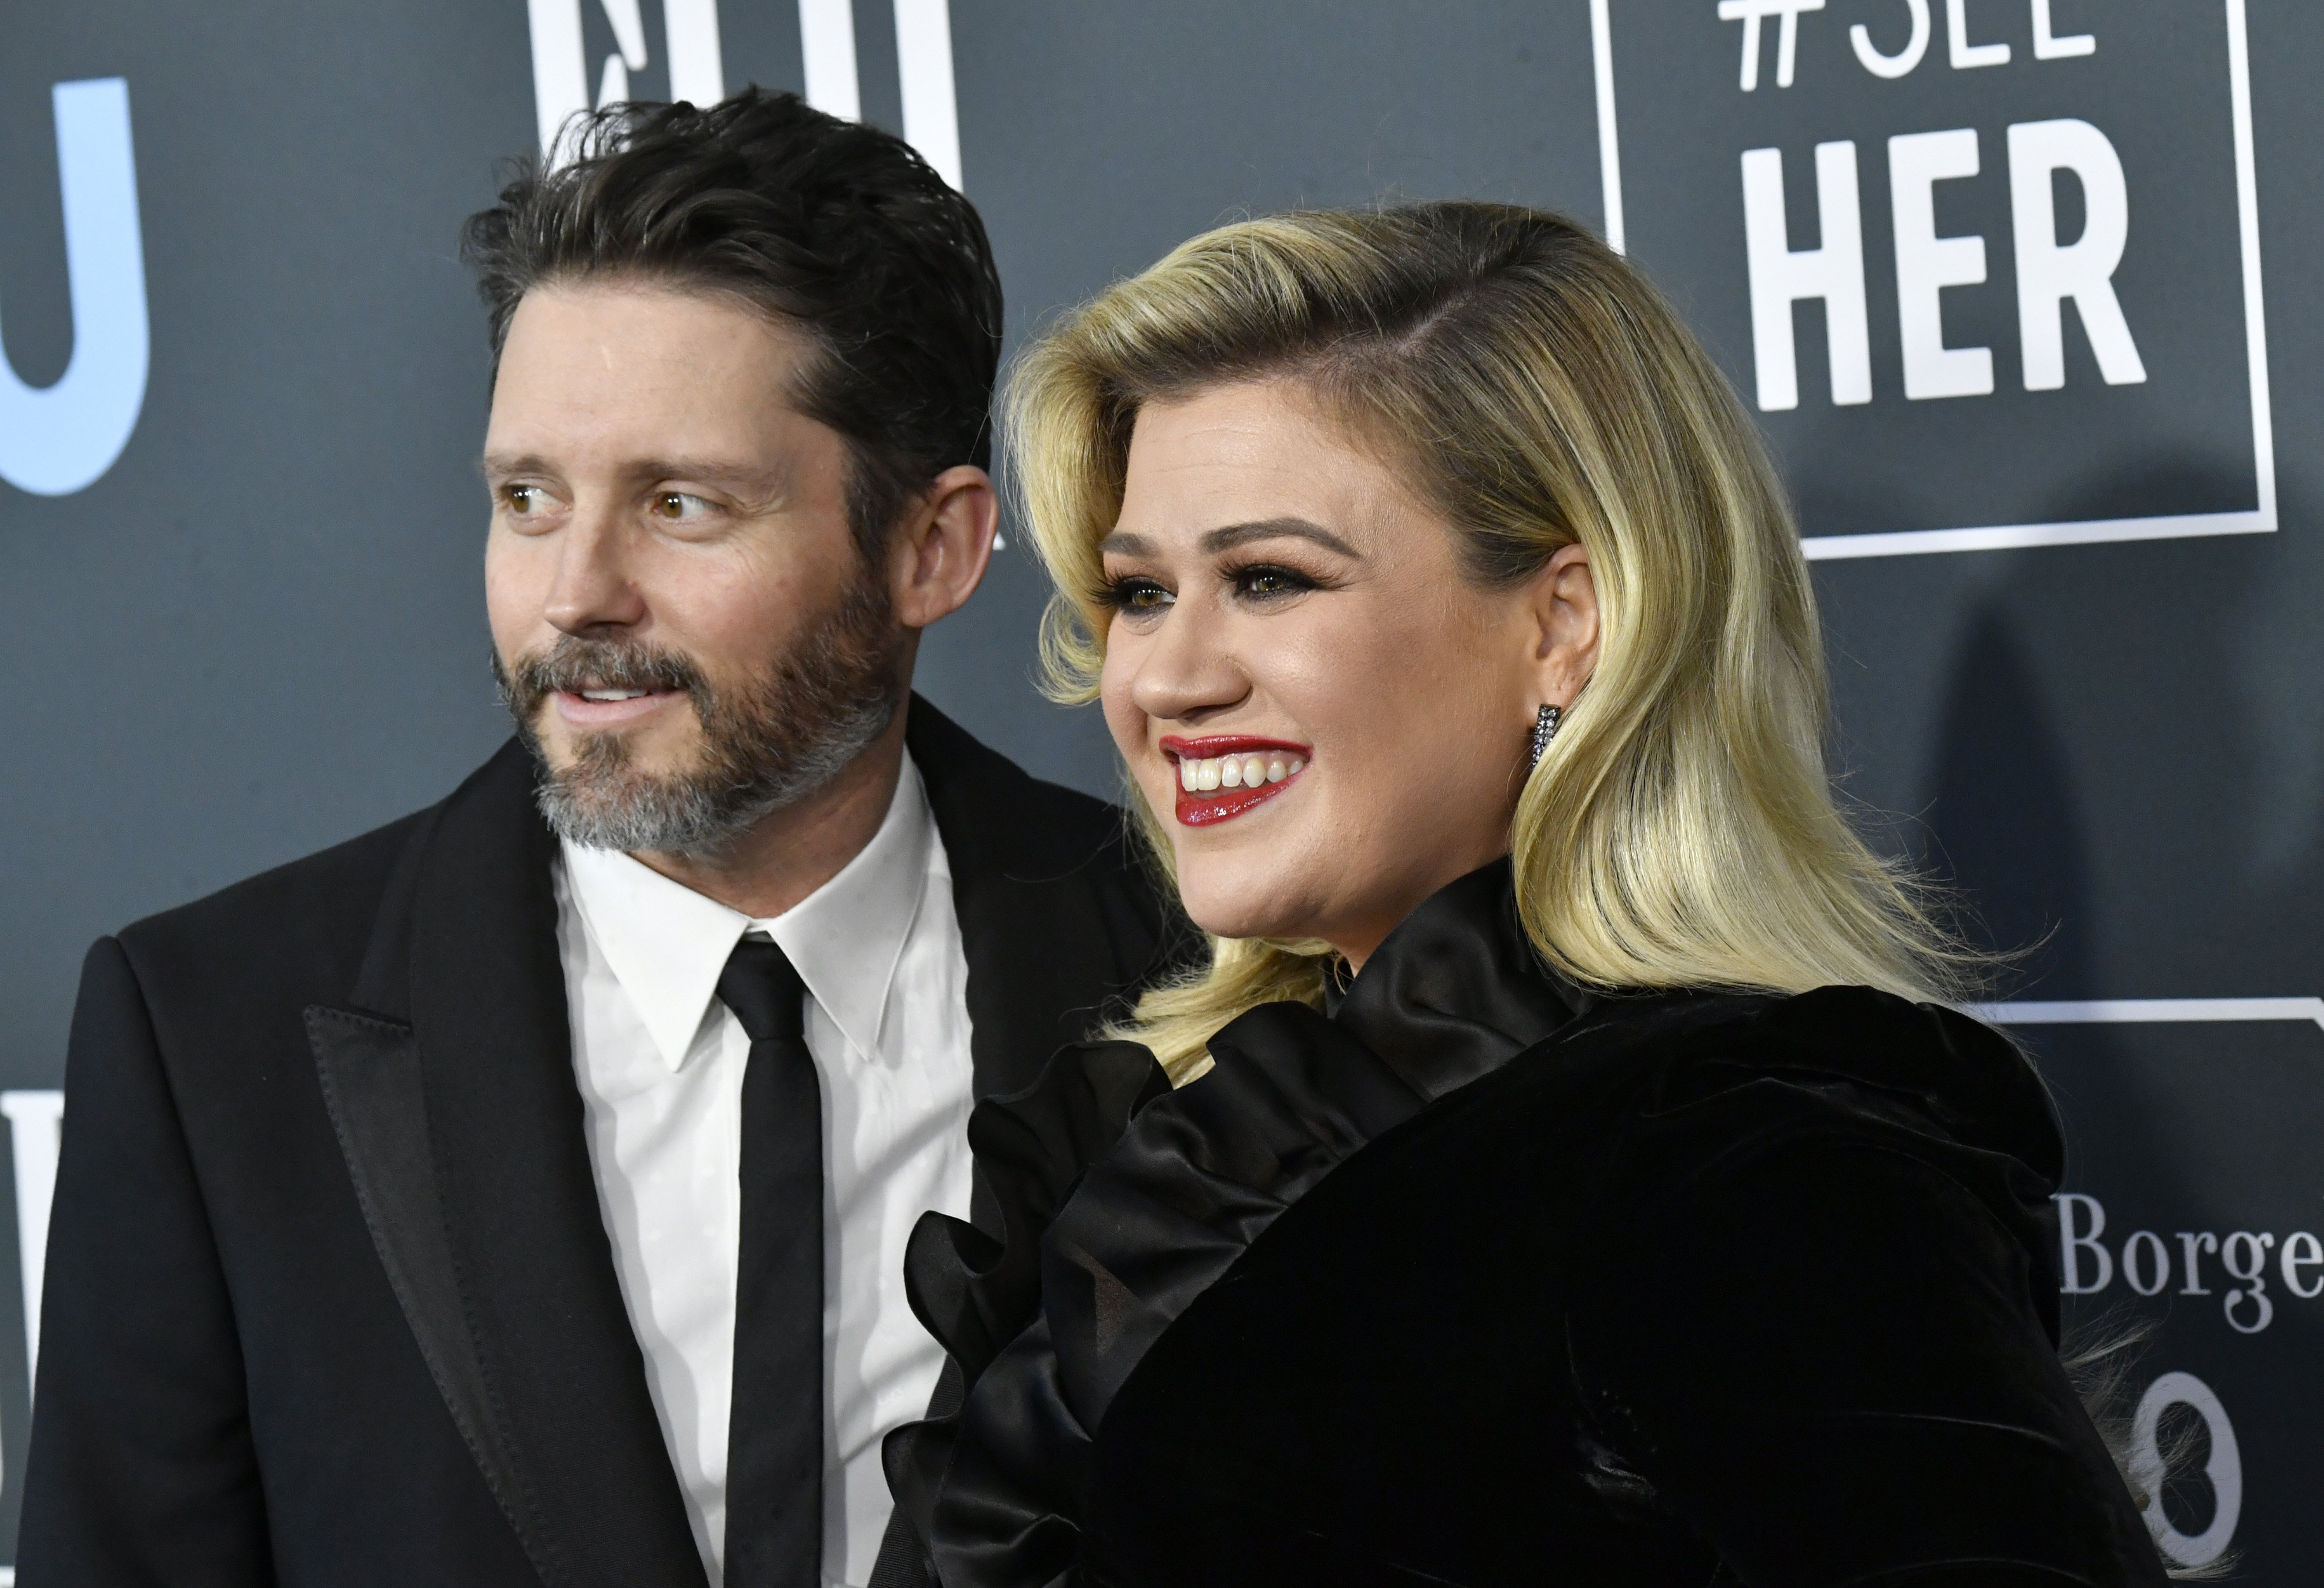 Brandon Blackstock and Kelly Clarkson attend the 25th Annual Critics' Choice Awards at Barker Hangar on January 12, 2020 in Santa Monica, California. |Source: Getty Images